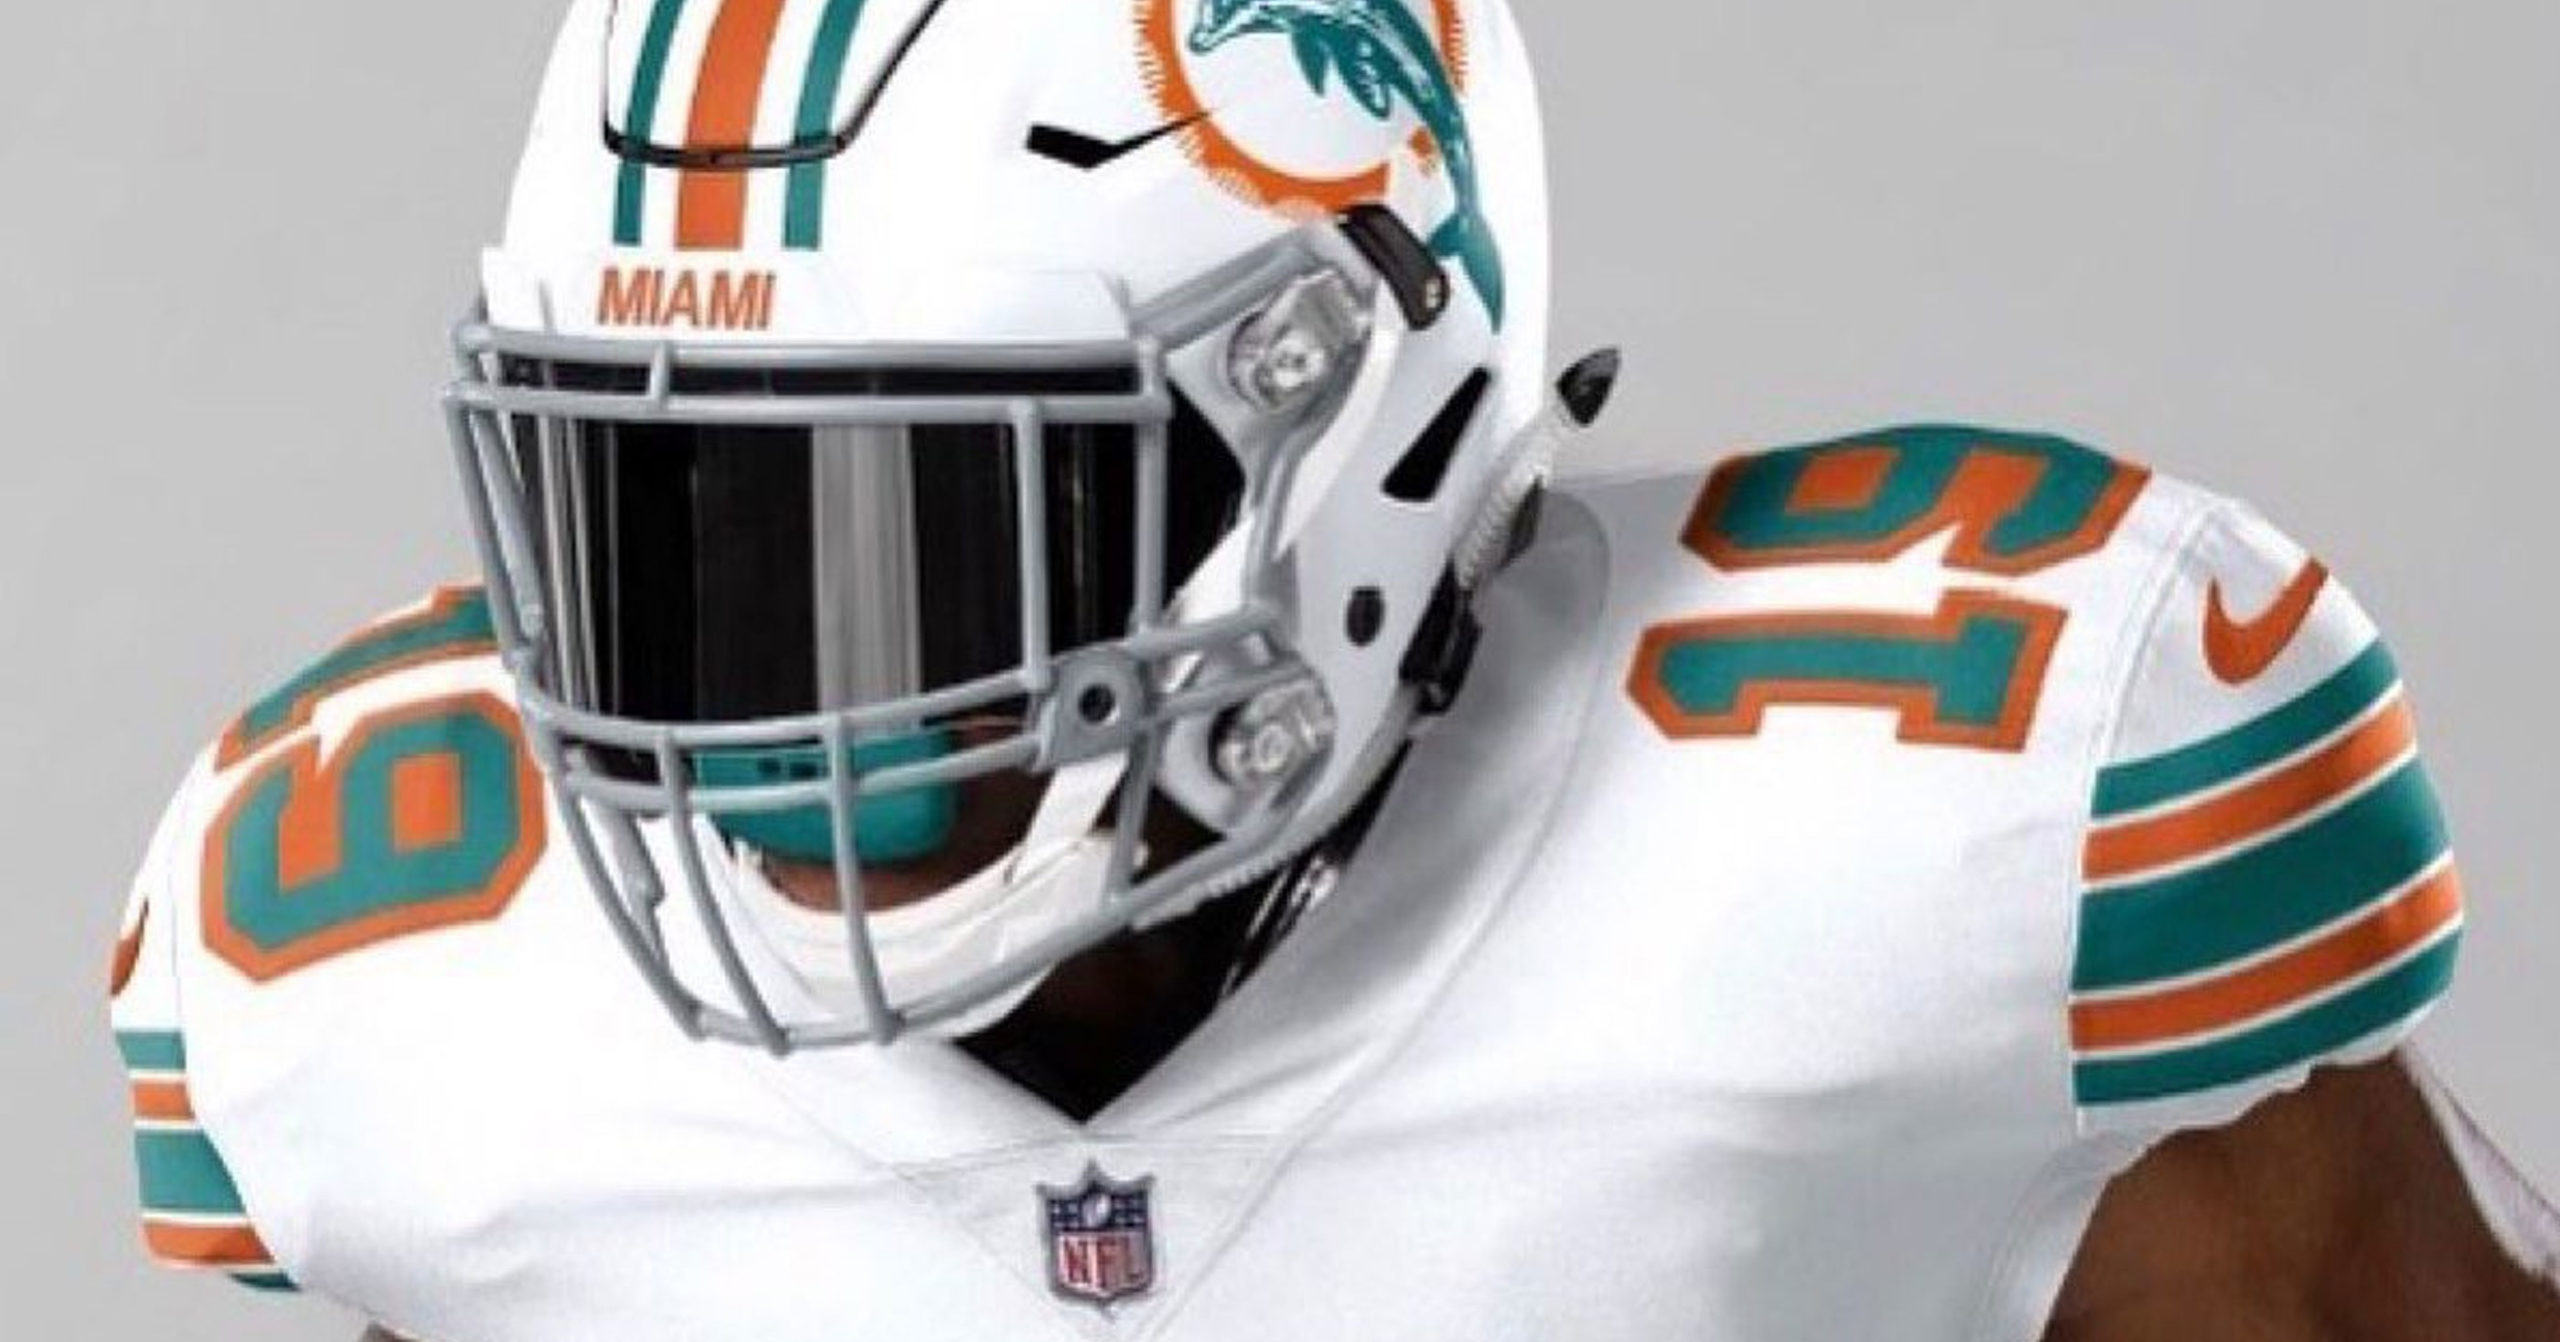 Miami Dolphins will continue to wear throwback uniforms in 2017-18 season –  SportsLogos.Net News